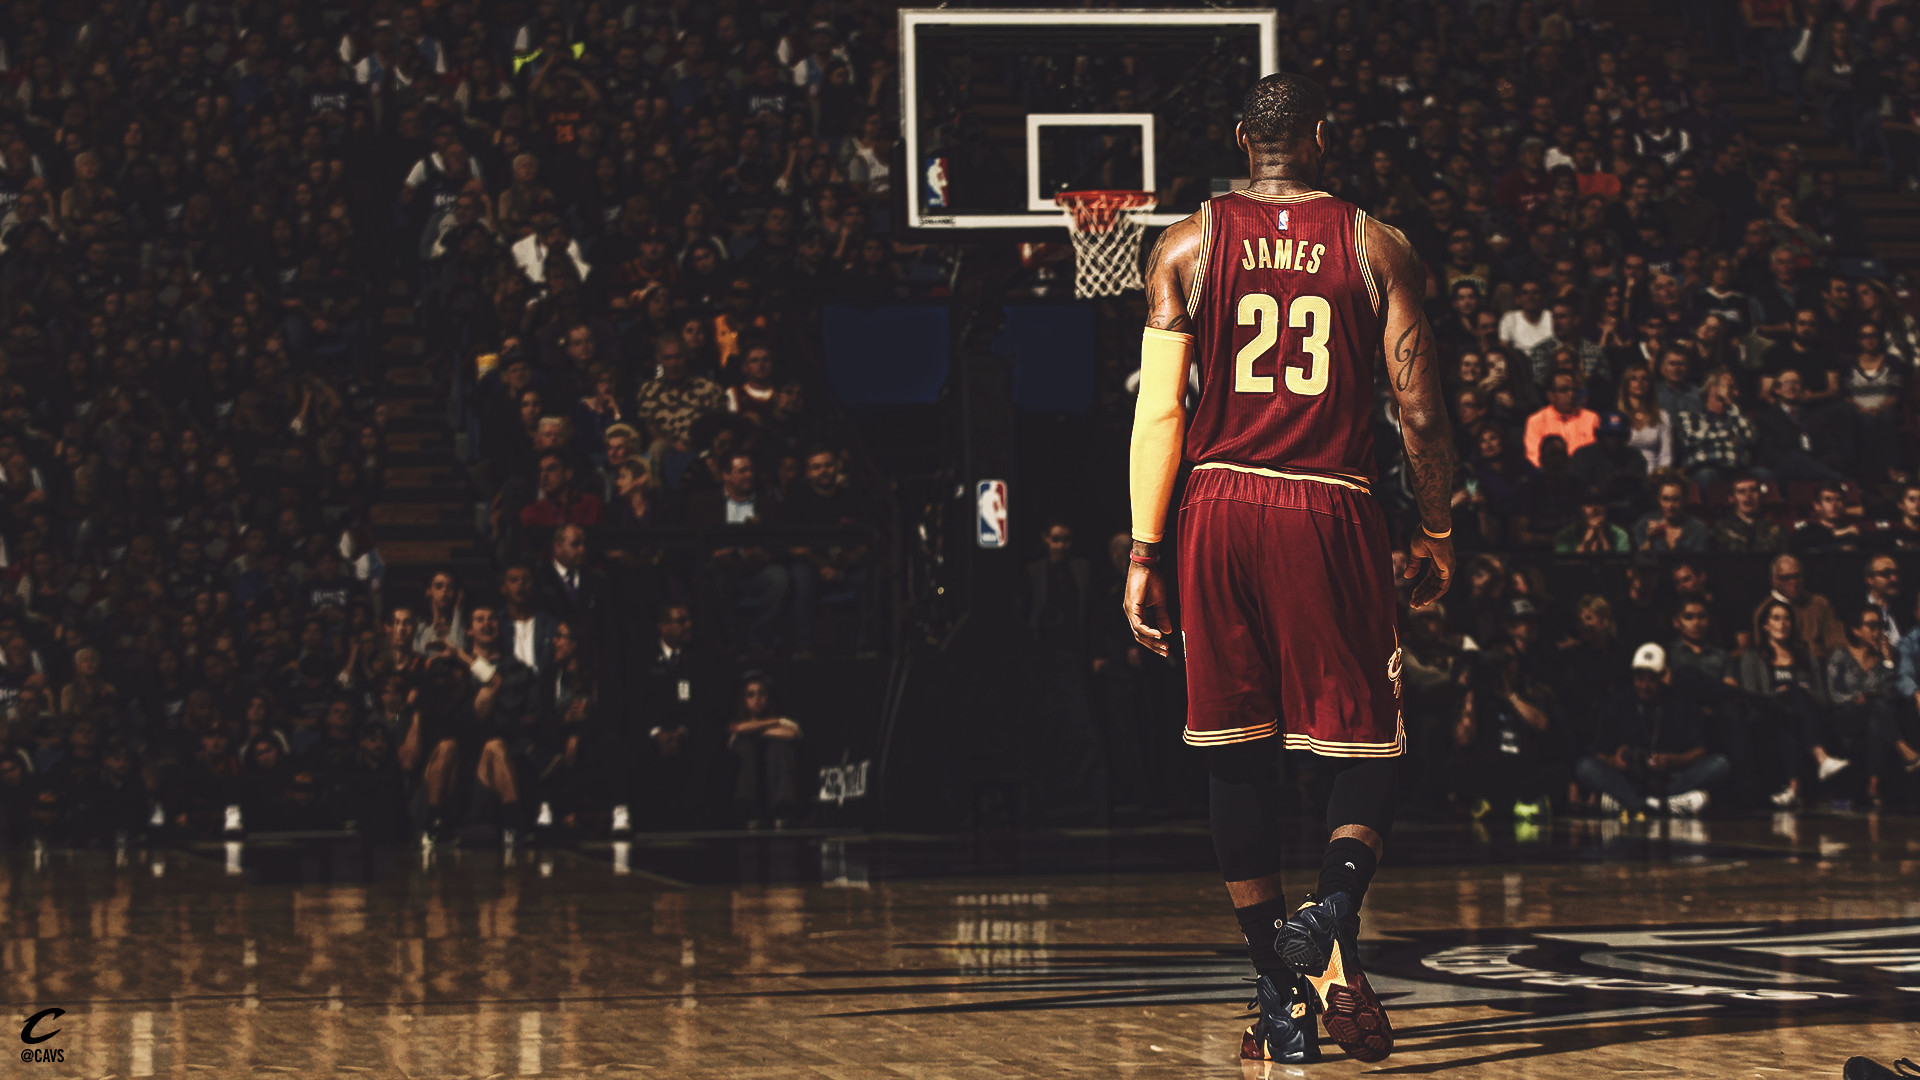 1920x1080 Free NBA wallpapers at HoopsWallpapers.com Newest NBA and ... - HD  Wallpapers